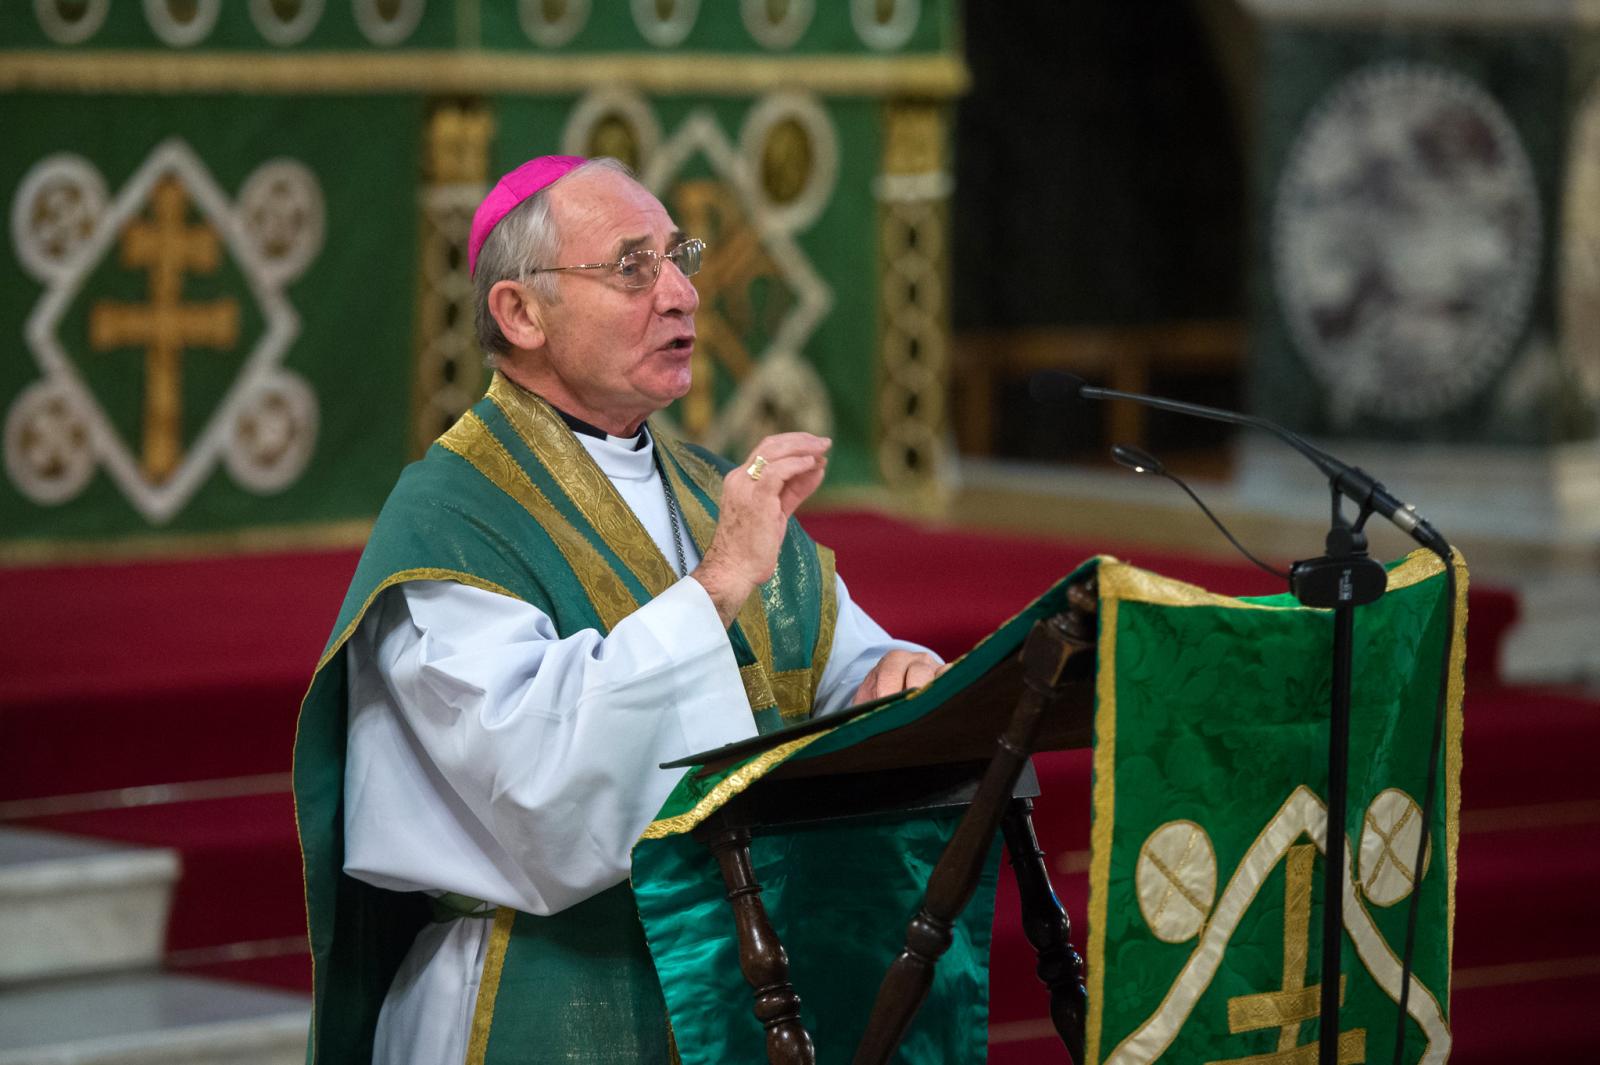 Bishop Paul: Take up Pope's call in Fratelli Tutti to oppose racism - Diocese of Westminster